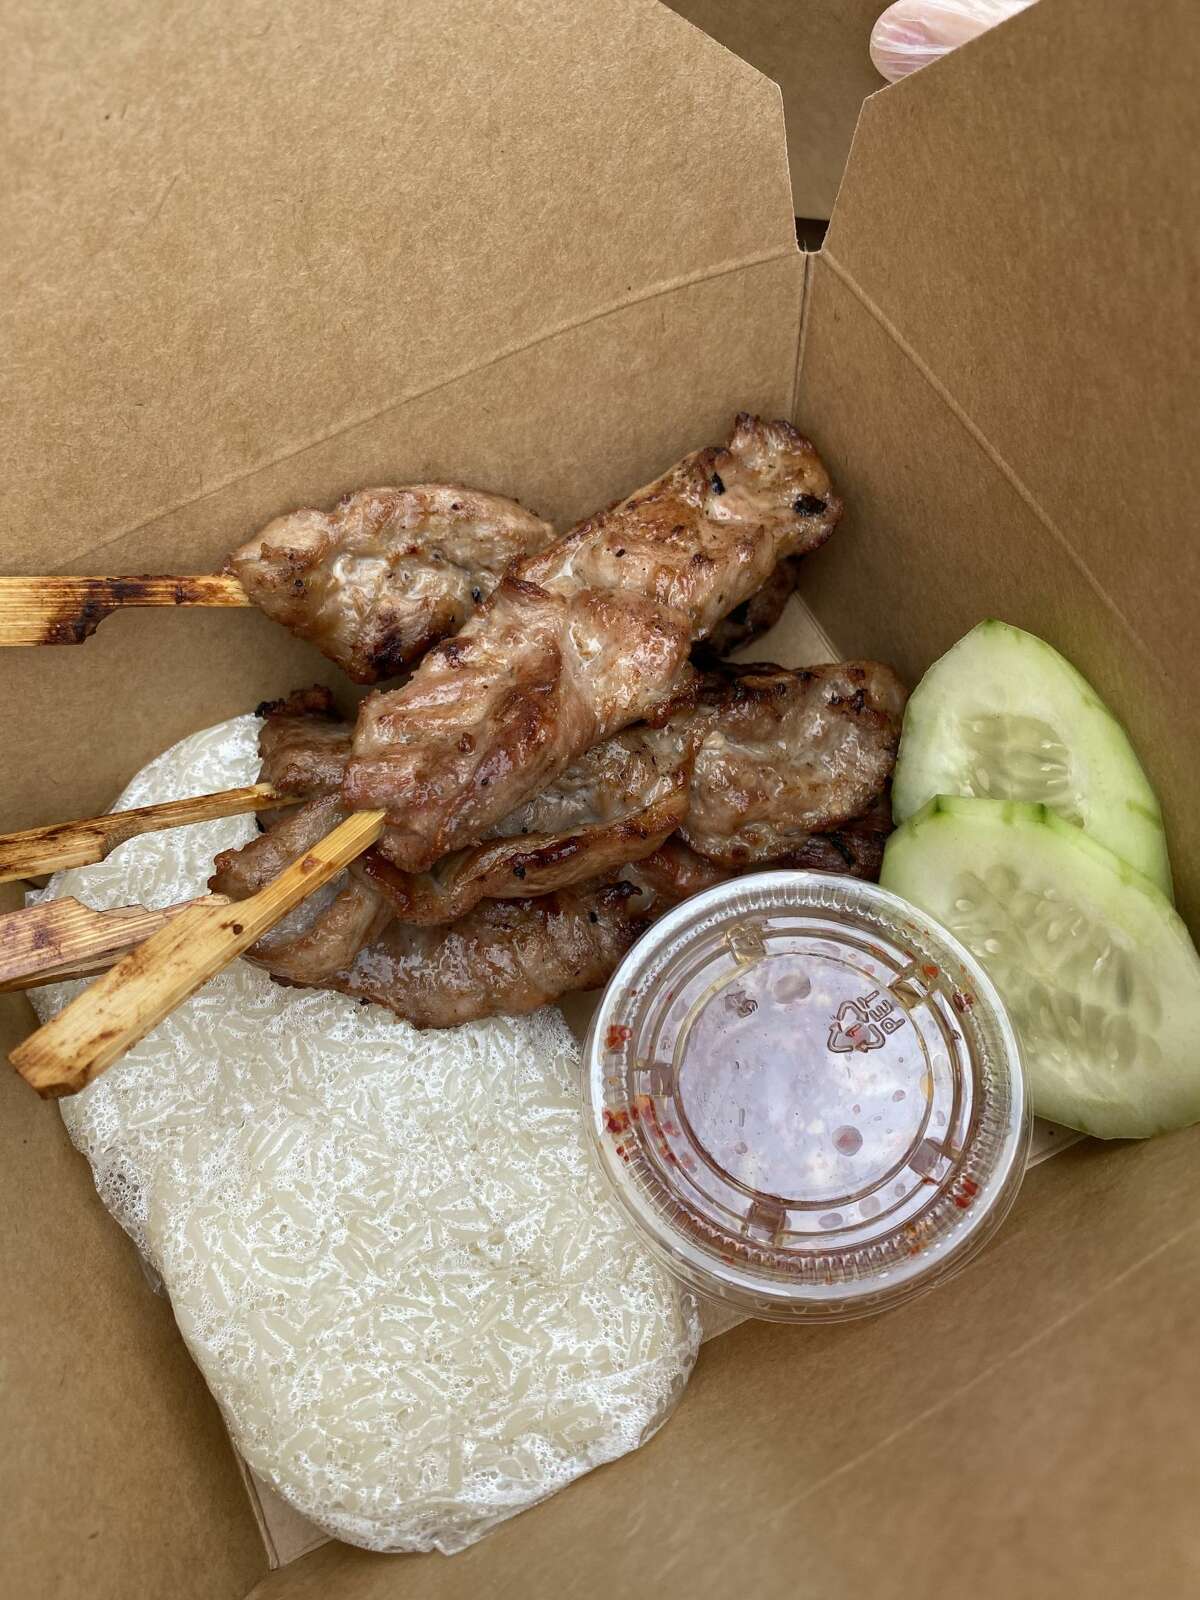 "Cooking is my passion. It helps me relax, and I enjoy it. With this pandemic going on, I just told myself, 'I'm going to open a food truck' and now here we are," Chaisittisinsuk said. (Pictured is Chaisittisinsuk's high school favorite, Moo Ping).